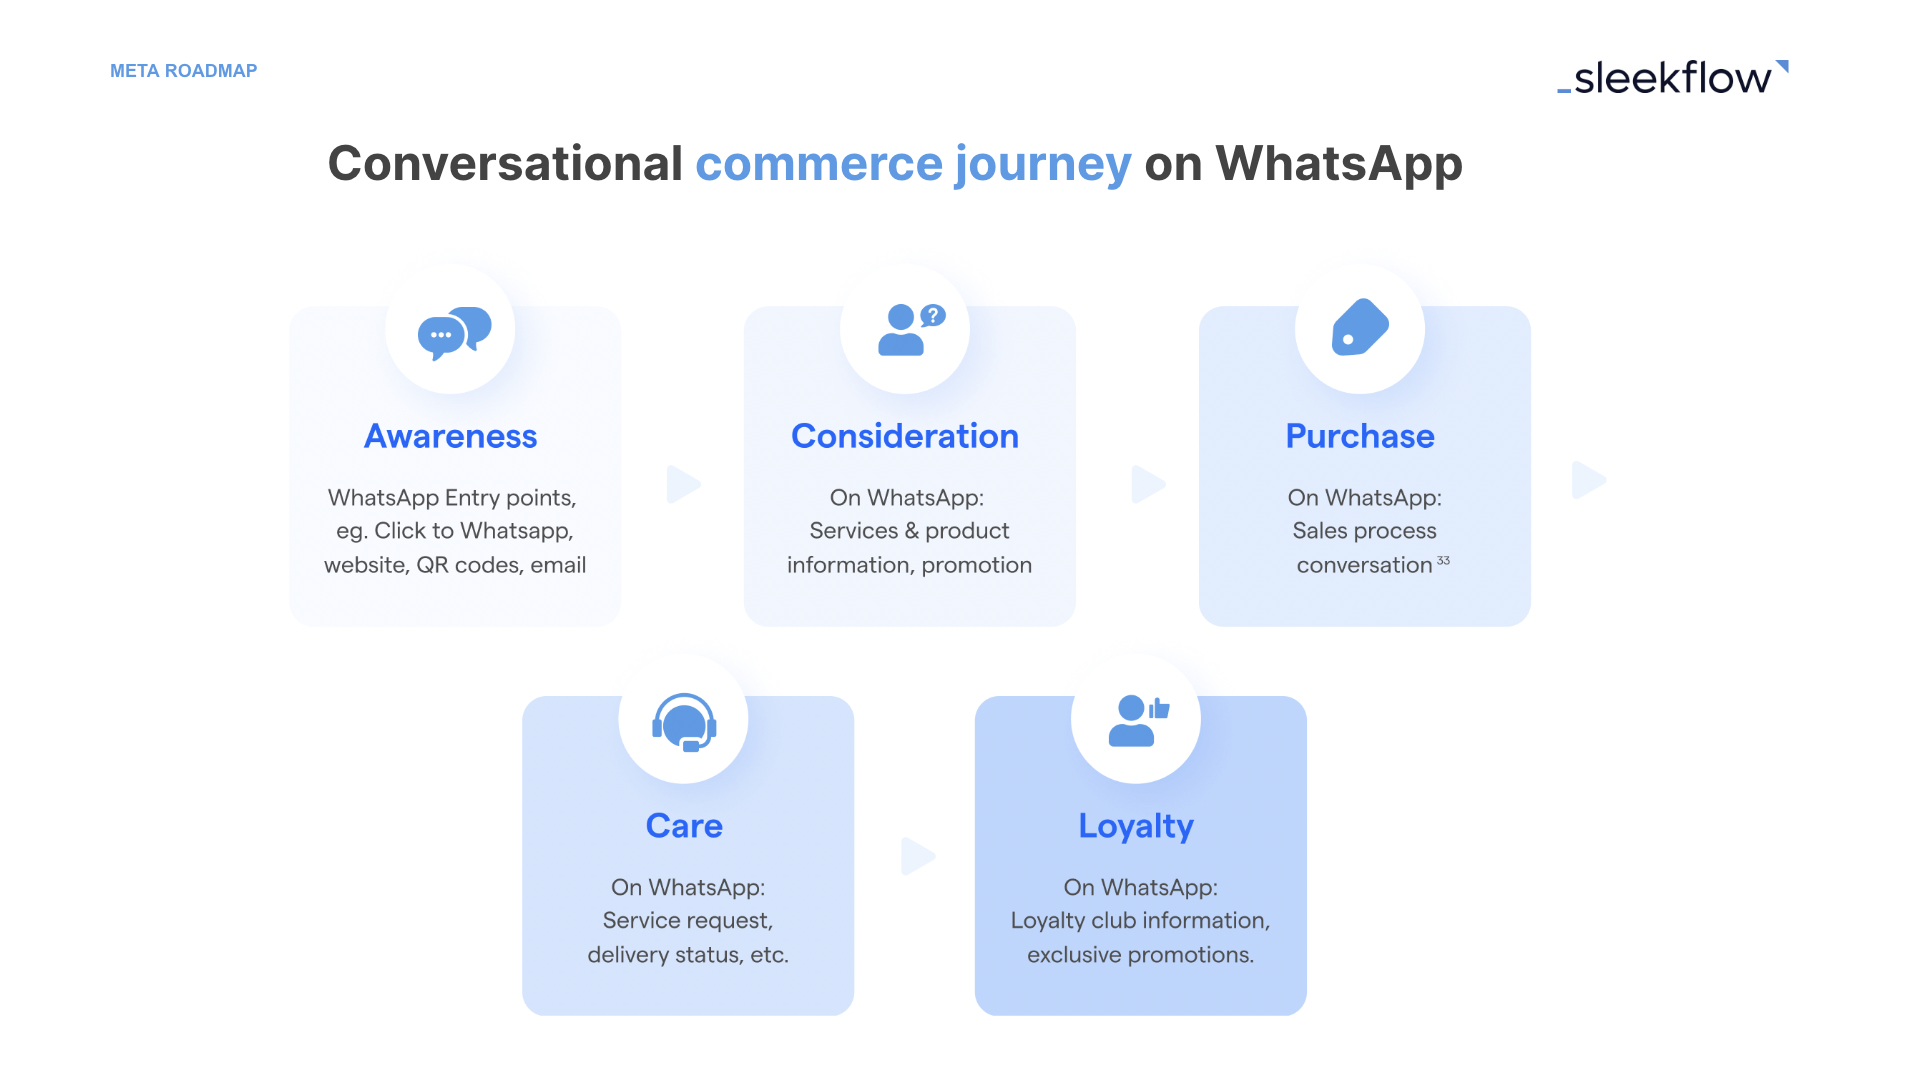 Conversational commerce journey with WhatsApp